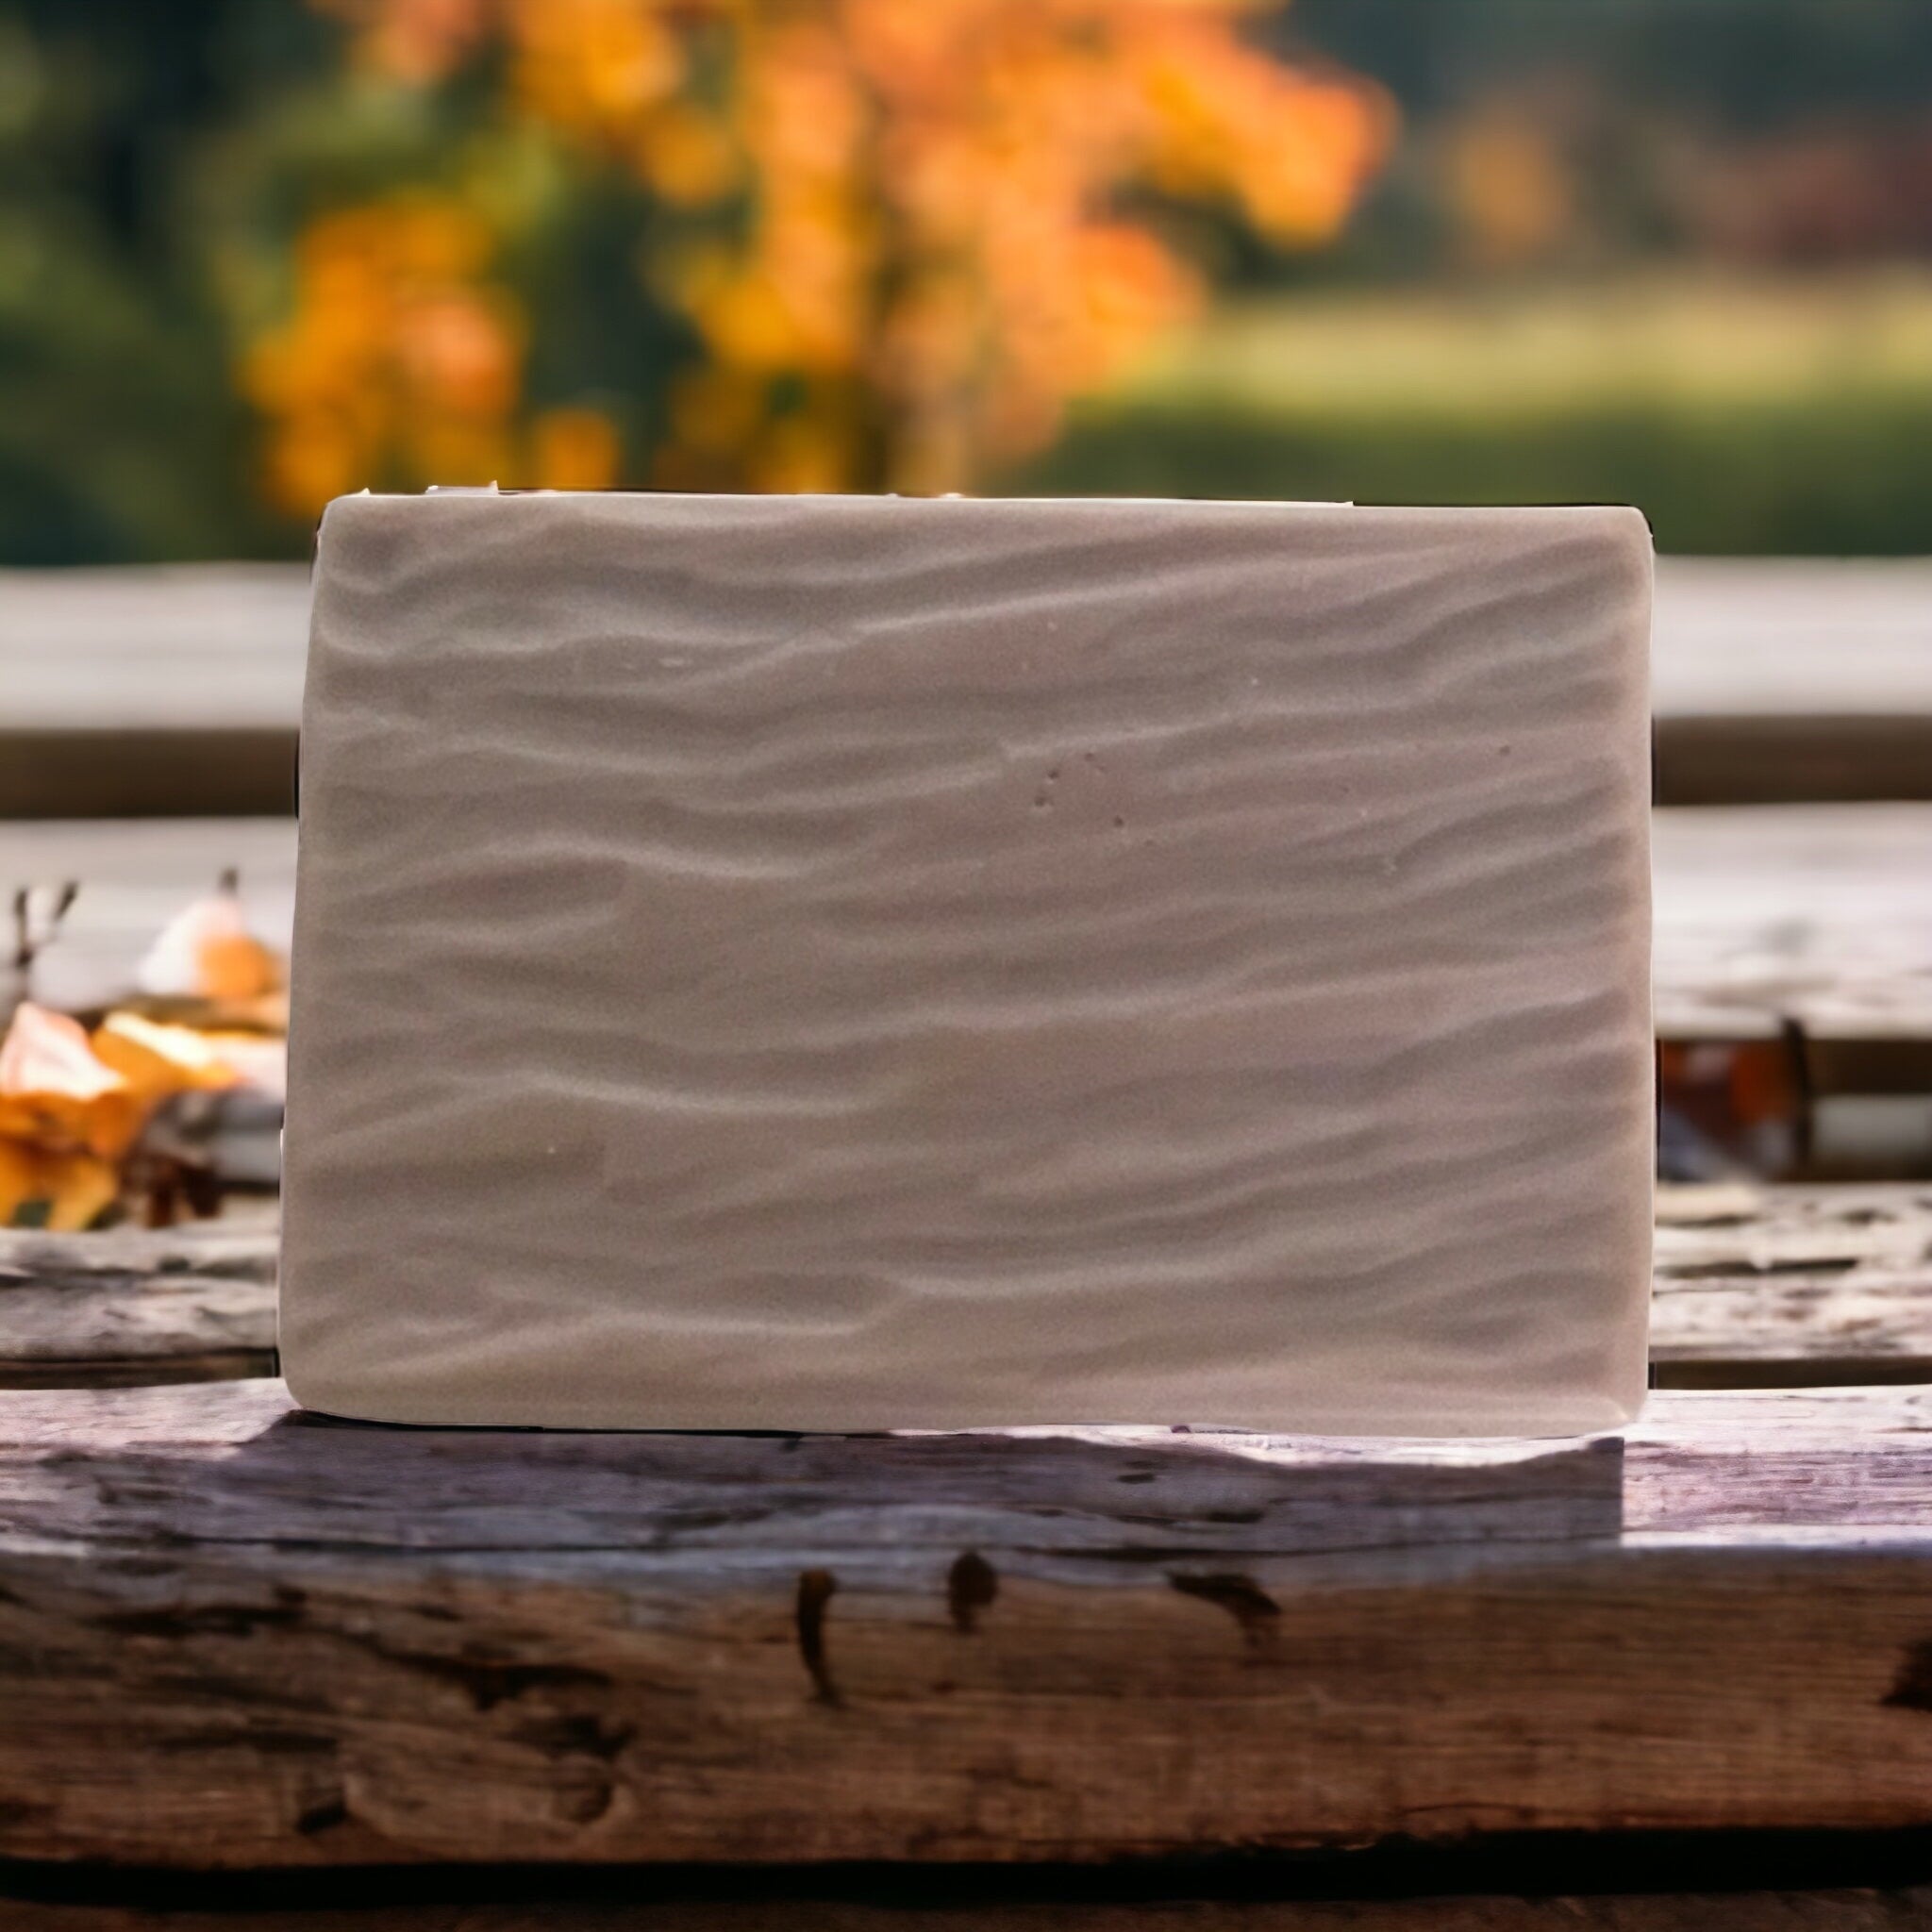 Photo of brown rectangular soap on a wooden tabel with fall leaves in the background for display